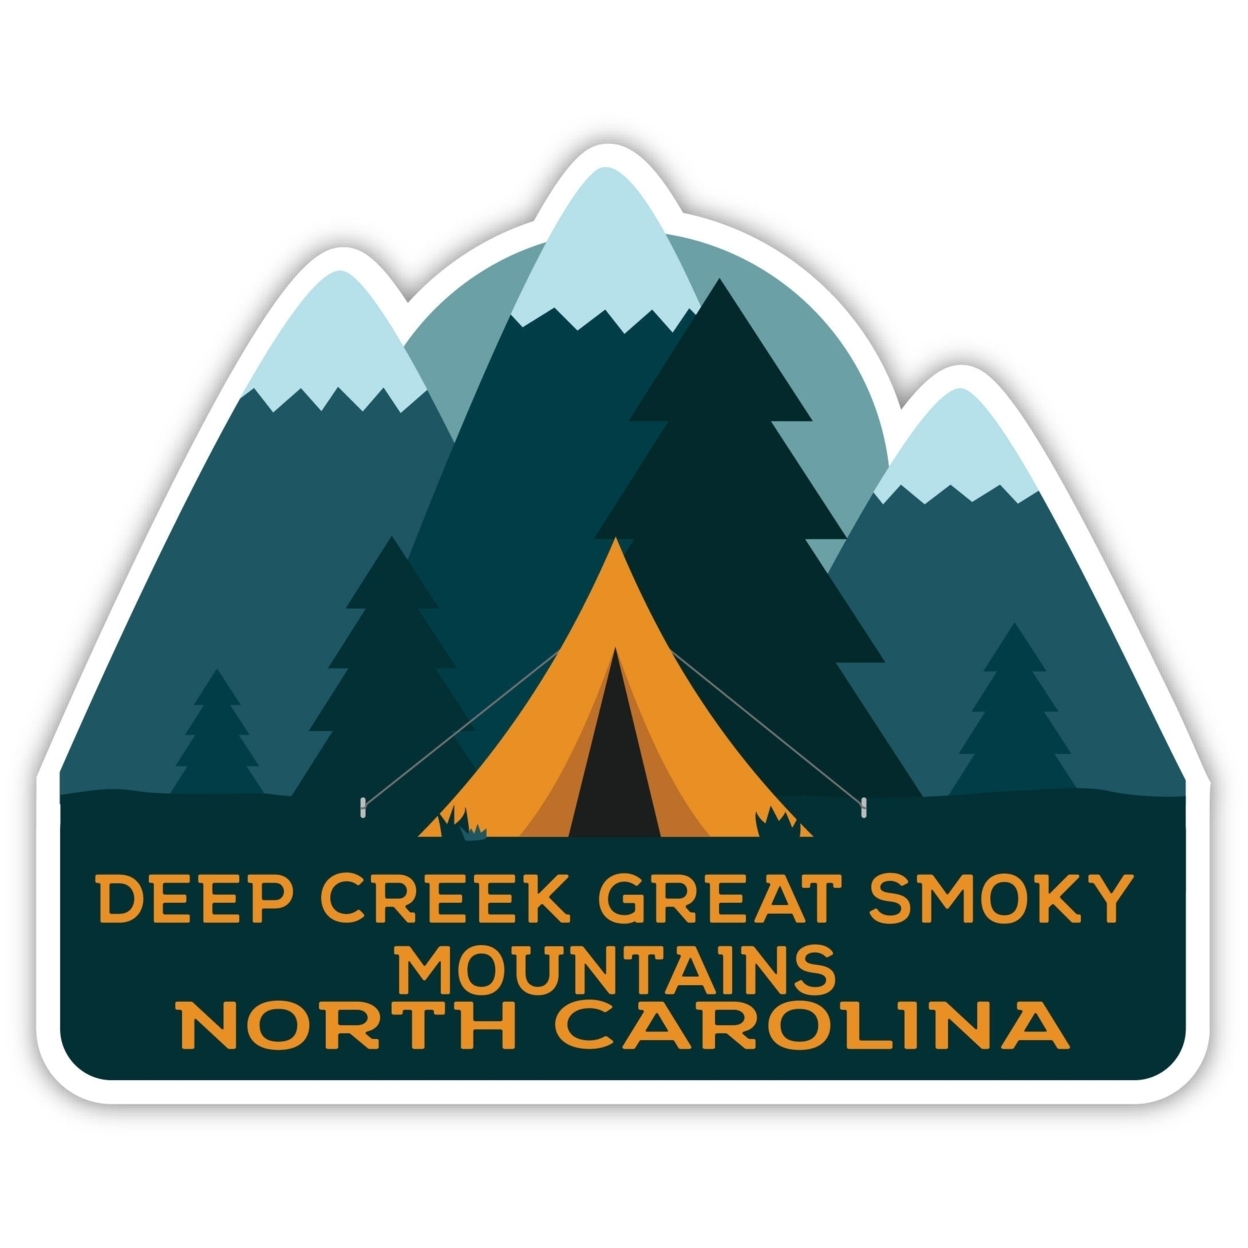 Deep Creek Great Smoky Mountains North Carolina Souvenir Decorative Stickers (Choose Theme And Size) - 4-Pack, 4-Inch, Tent